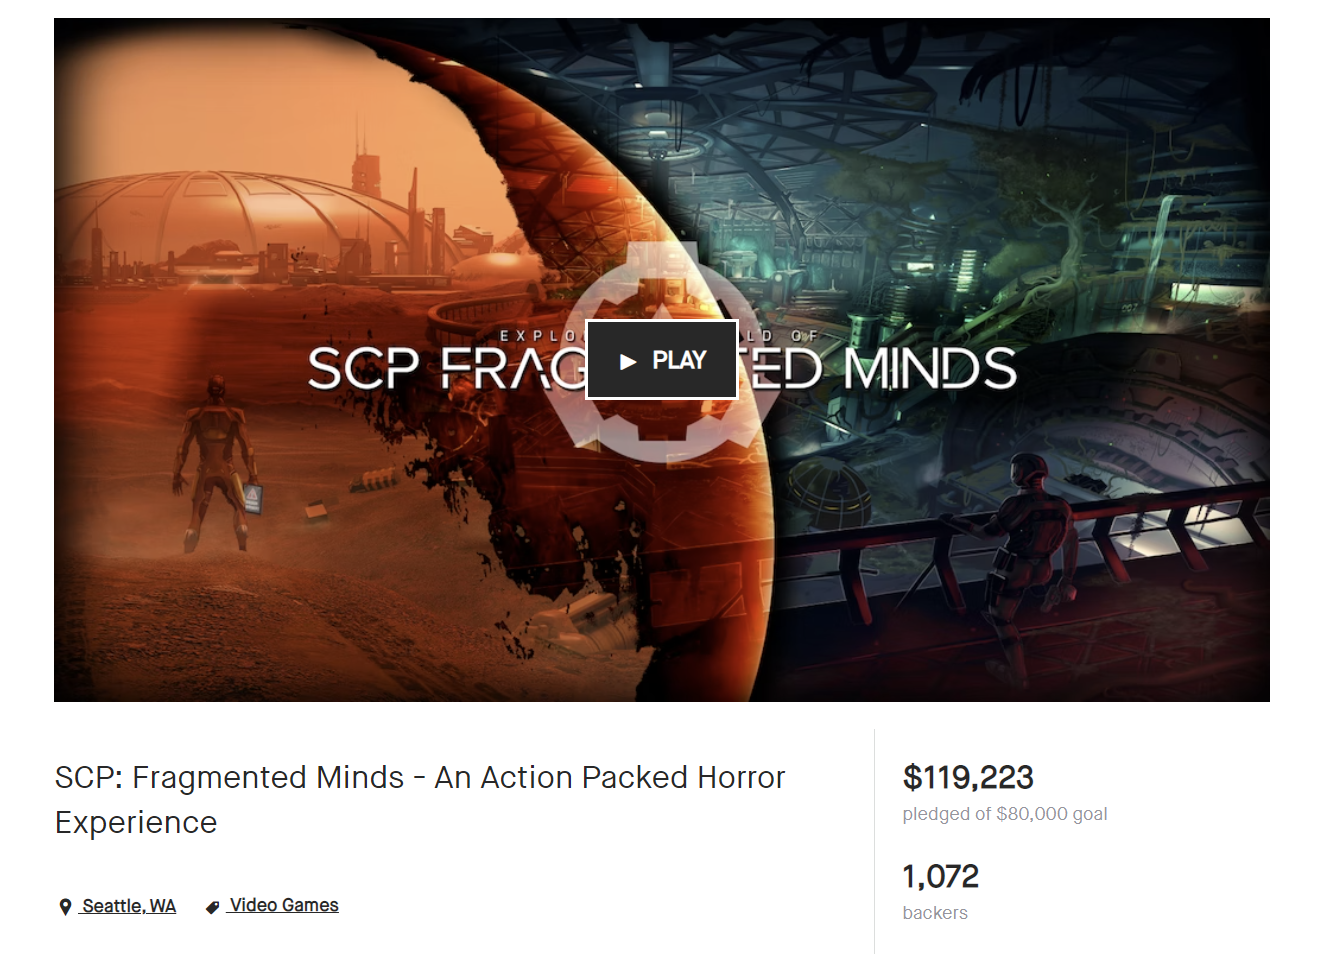 SCP: Fragmented Minds - An Action Packed Horror Experience by HST